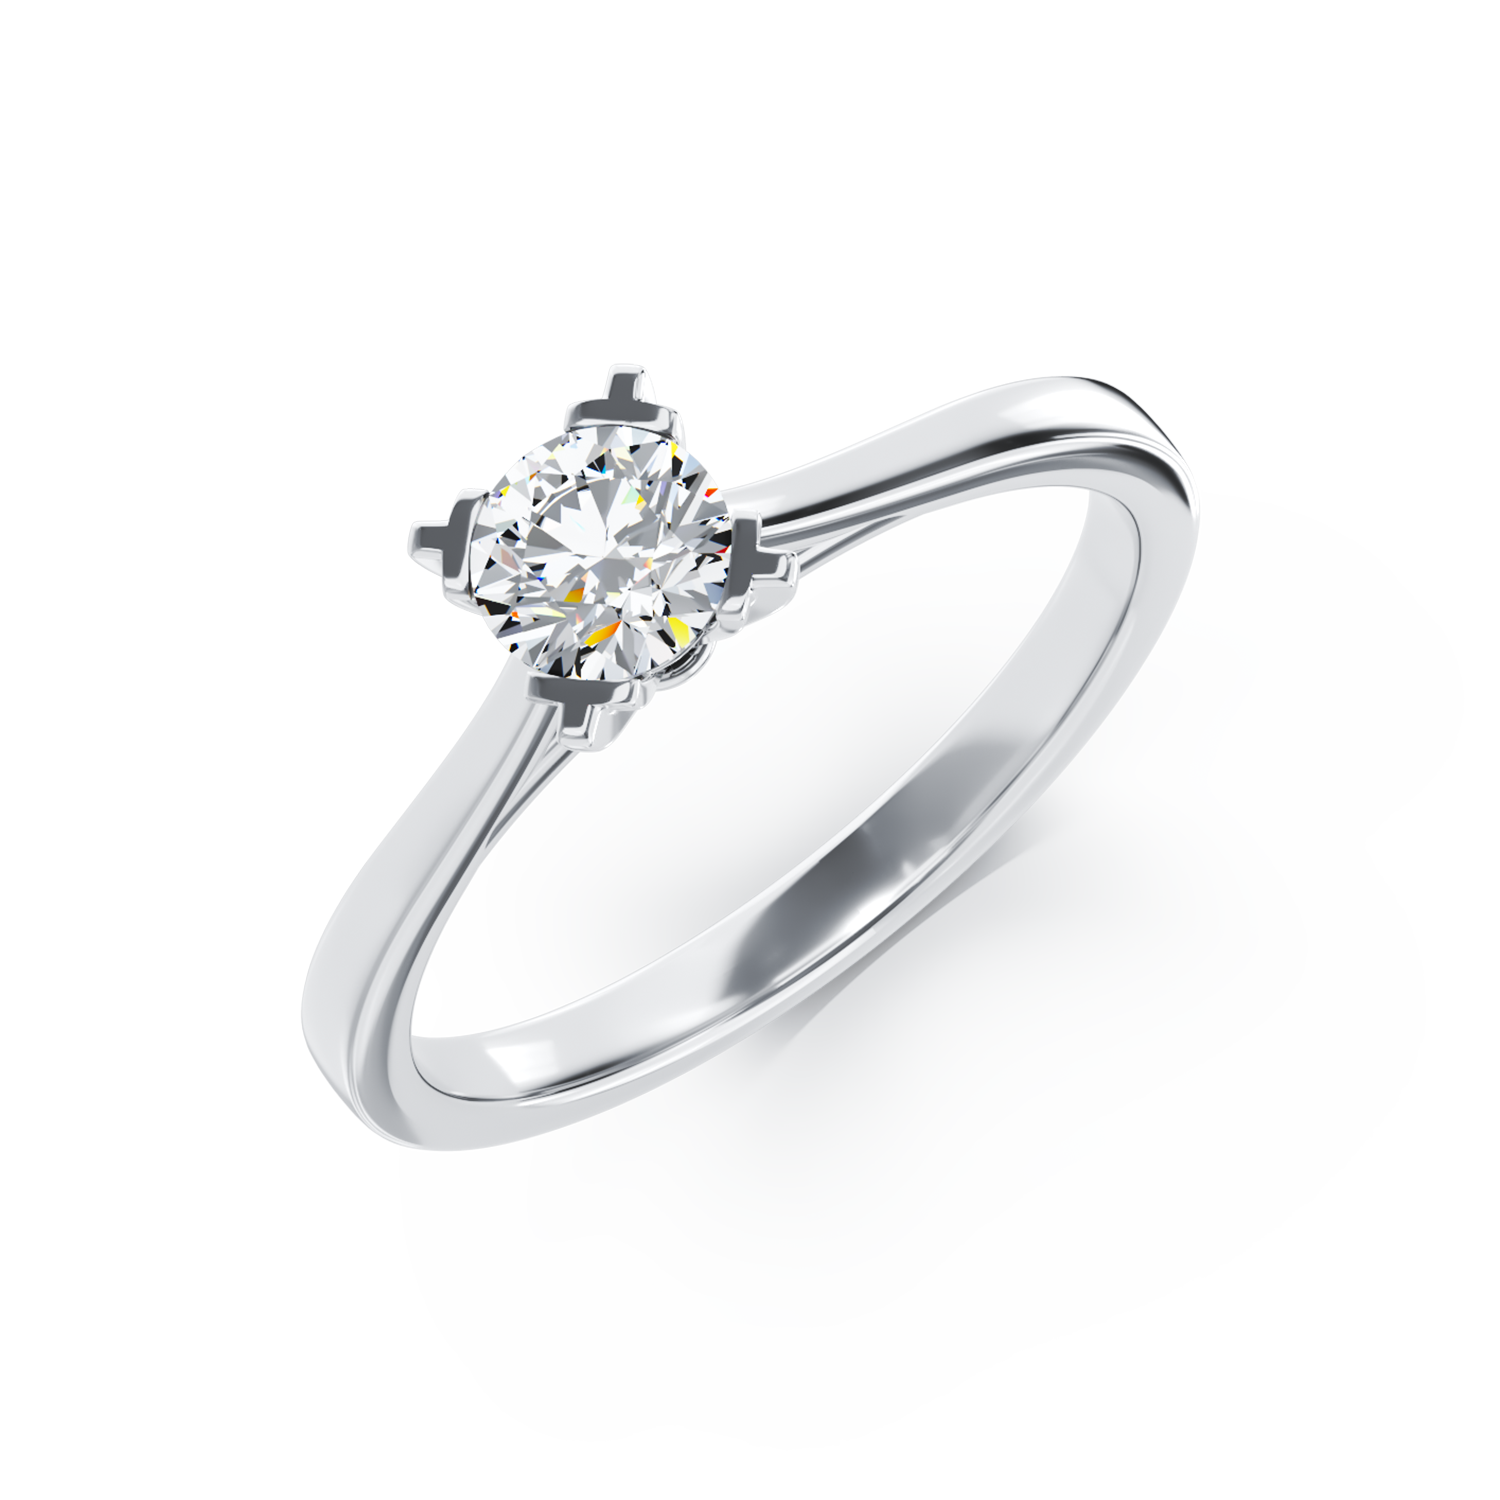 18K white gold engagement ring with a 0.26ct solitaire diamond